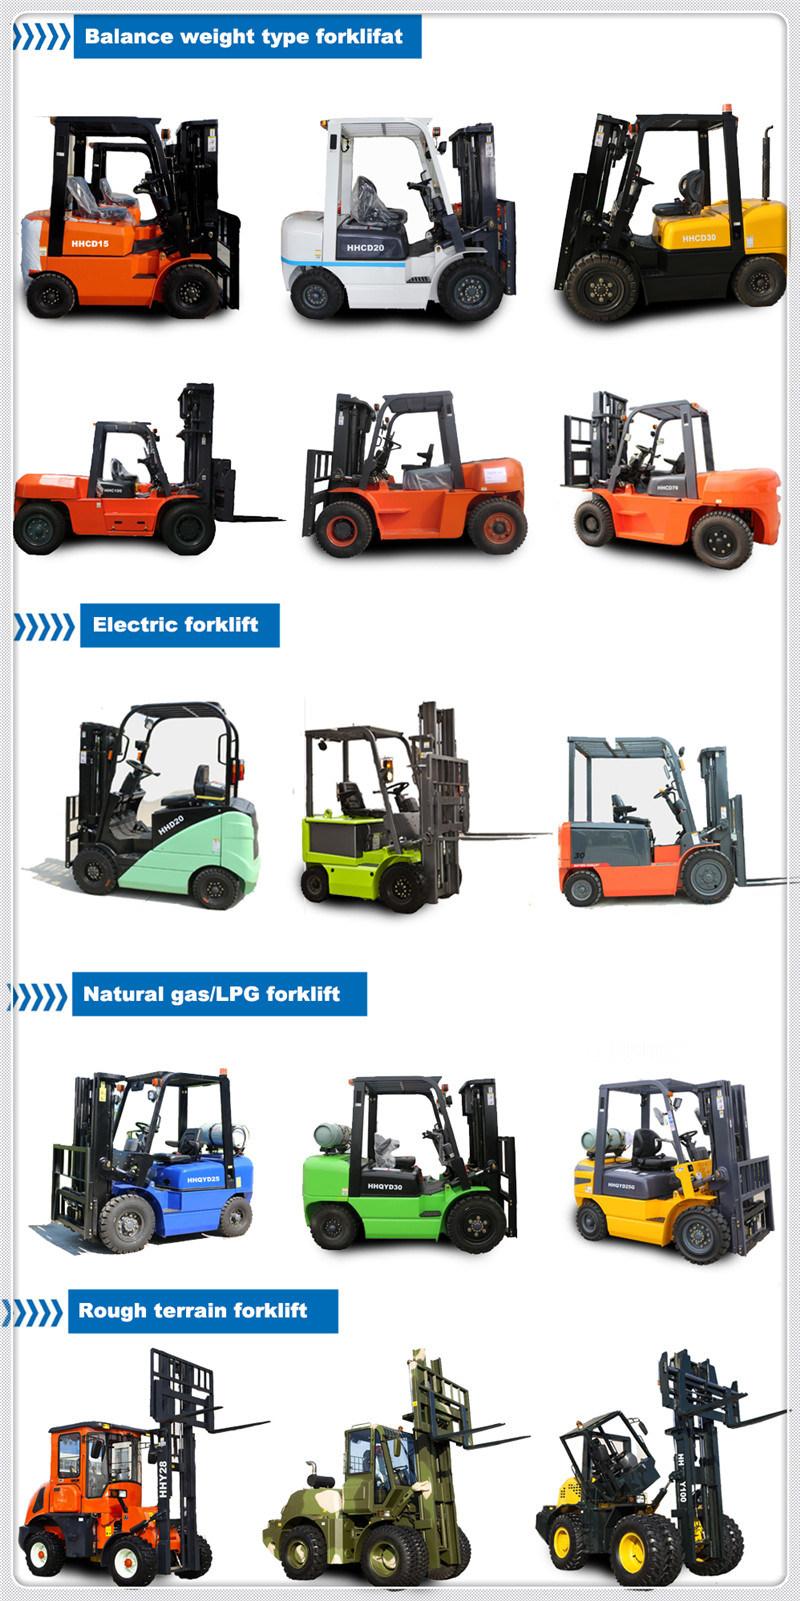 2.5ton Automatic Diesel Forklift Truck with Snow Bucket Pallet Fork